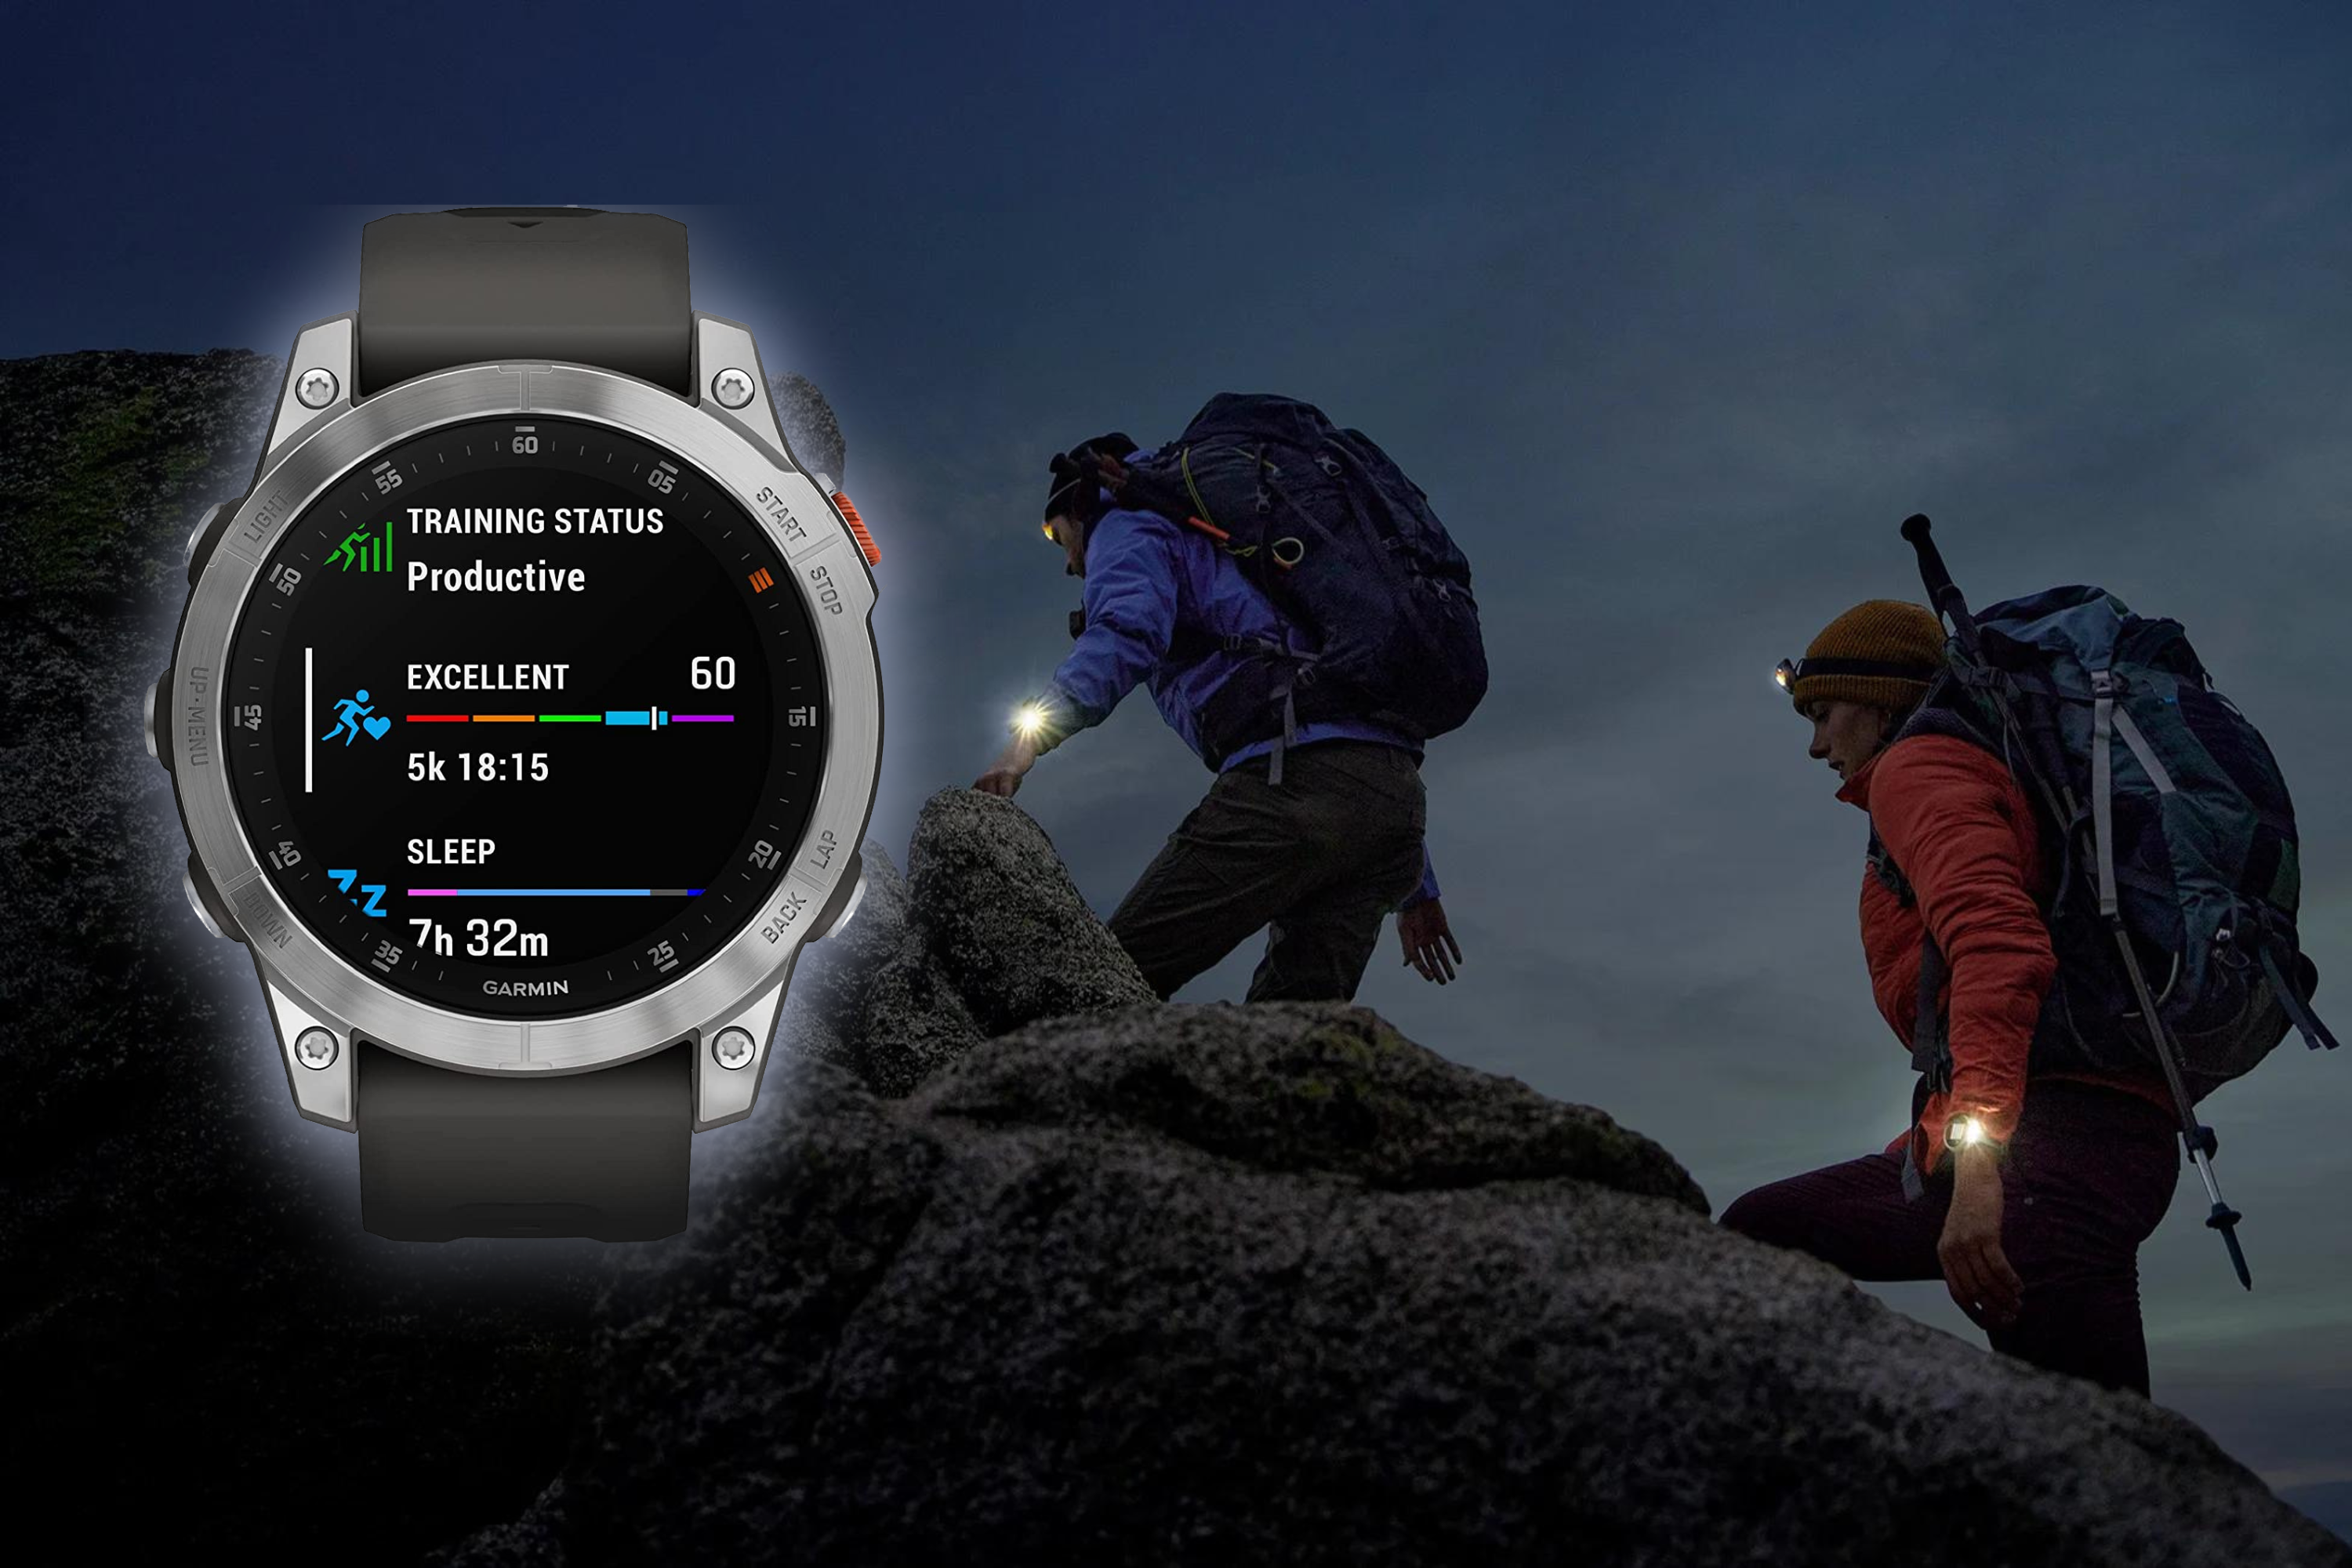 Garmin epix Gen 2 in frame with two climbers in the background 